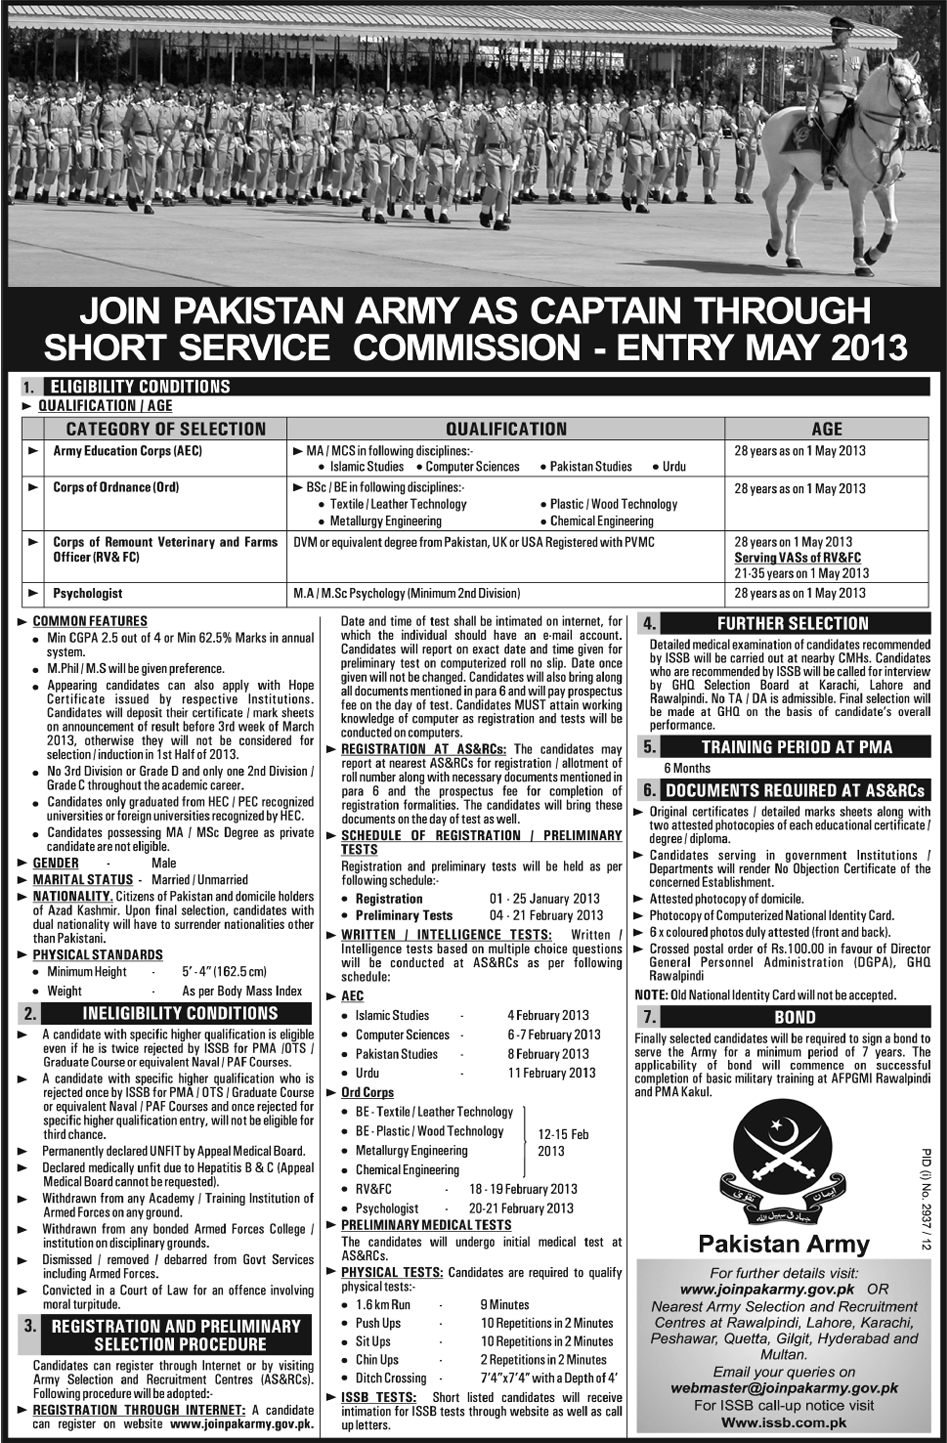 Join Pakistan Army as Captain Through Short Service Commission Entry May 2013